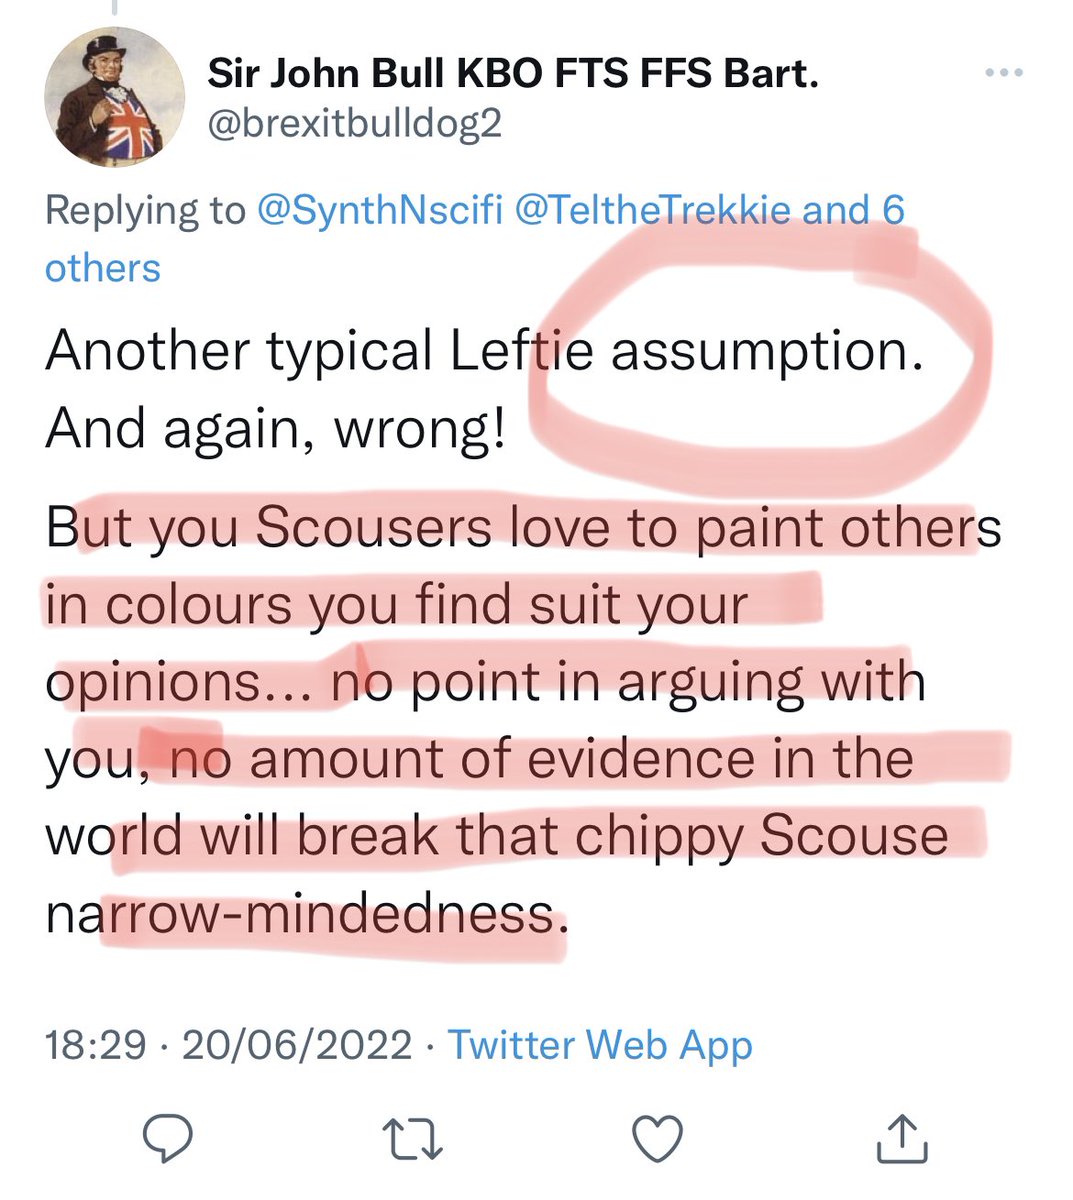 @brexitbulldog2 @TeltheTrekkie @CrabCrisp @JesteR6_sd @LeslieMilnes @christiancalgie @QMac784 @TfL Oh. Please do keep lecturing me about “assumptions” John. Because obviously a megabrain like you wouldn’t unwittingly shit his pants in the same tweet so therefore must have some really good long game